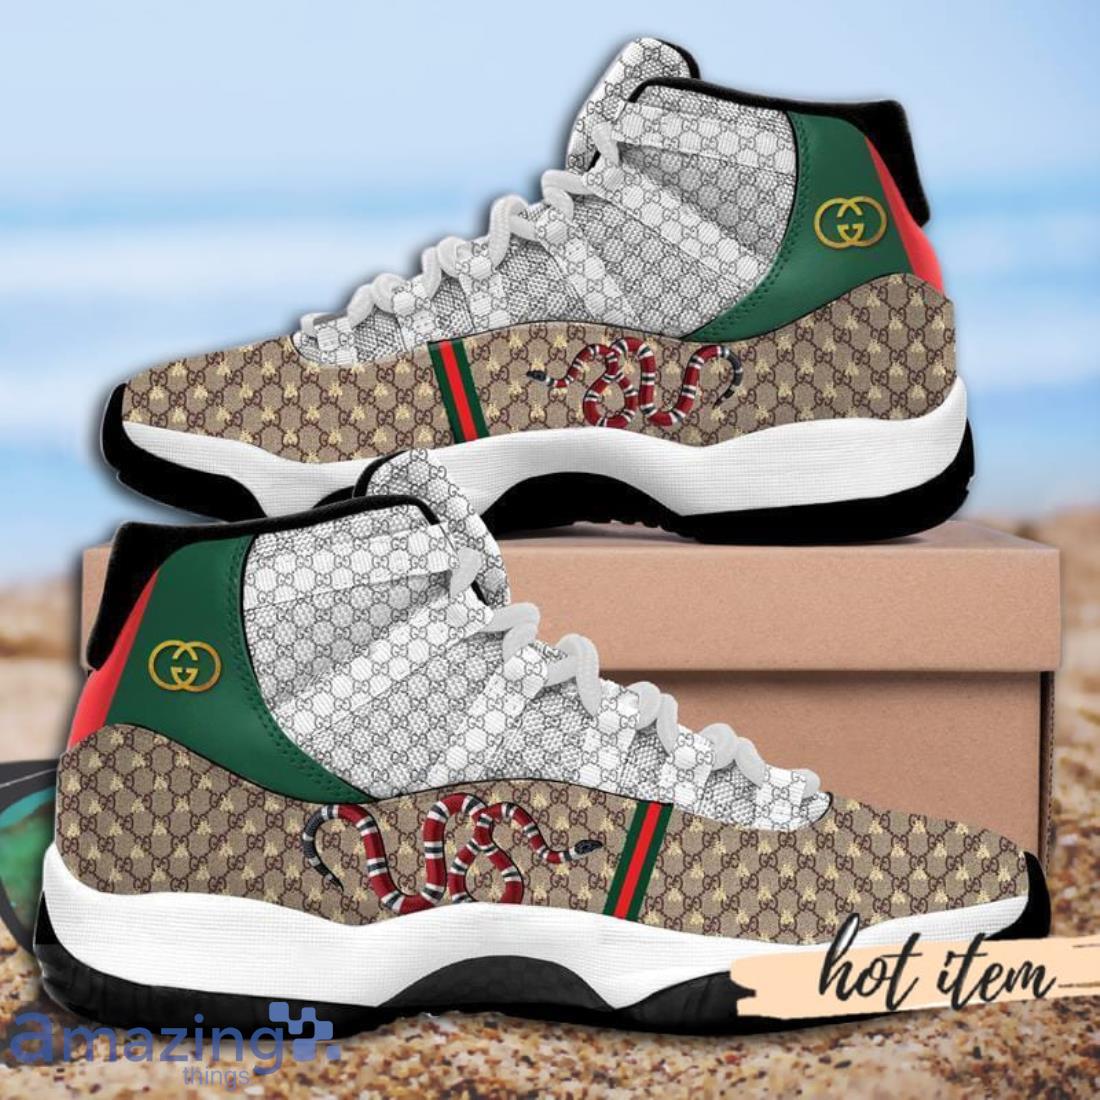 Luxury Gucci Snake 11 Shoes Gucci Gifts For Men Women